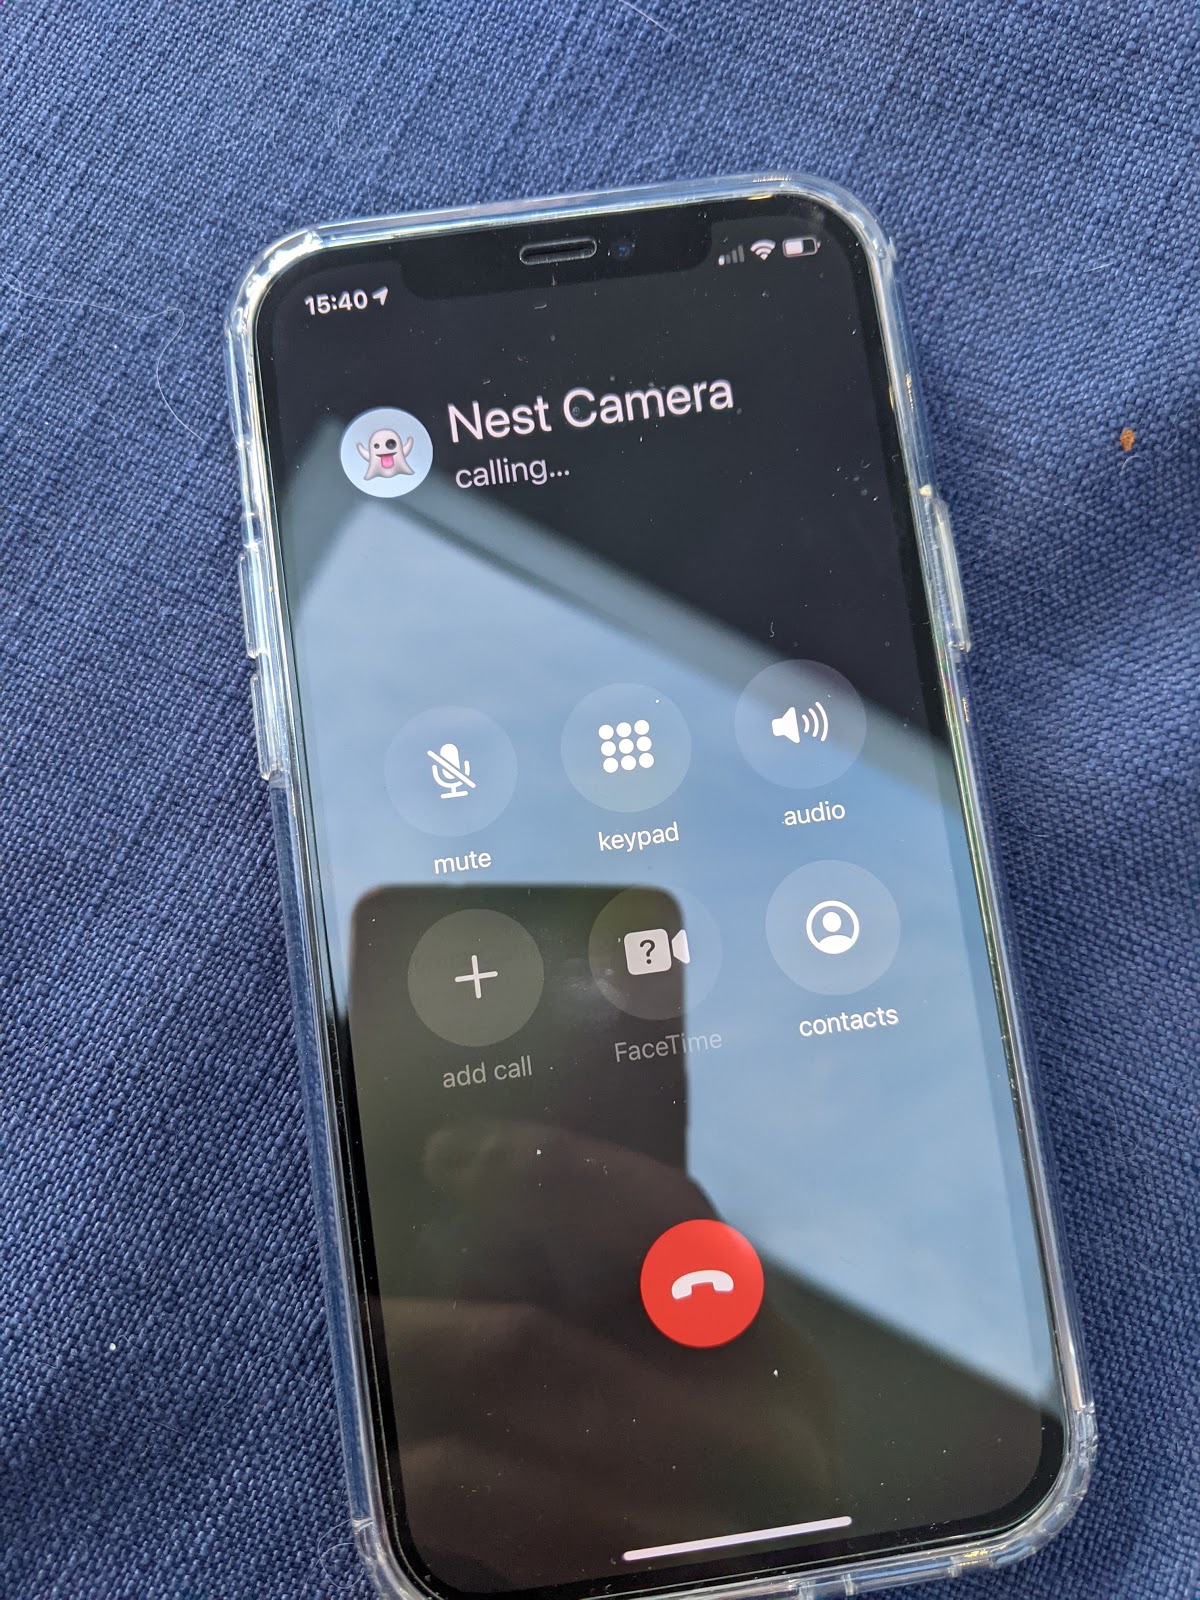 Phone ringing with call from &#x27;Nest Camera&#x27;